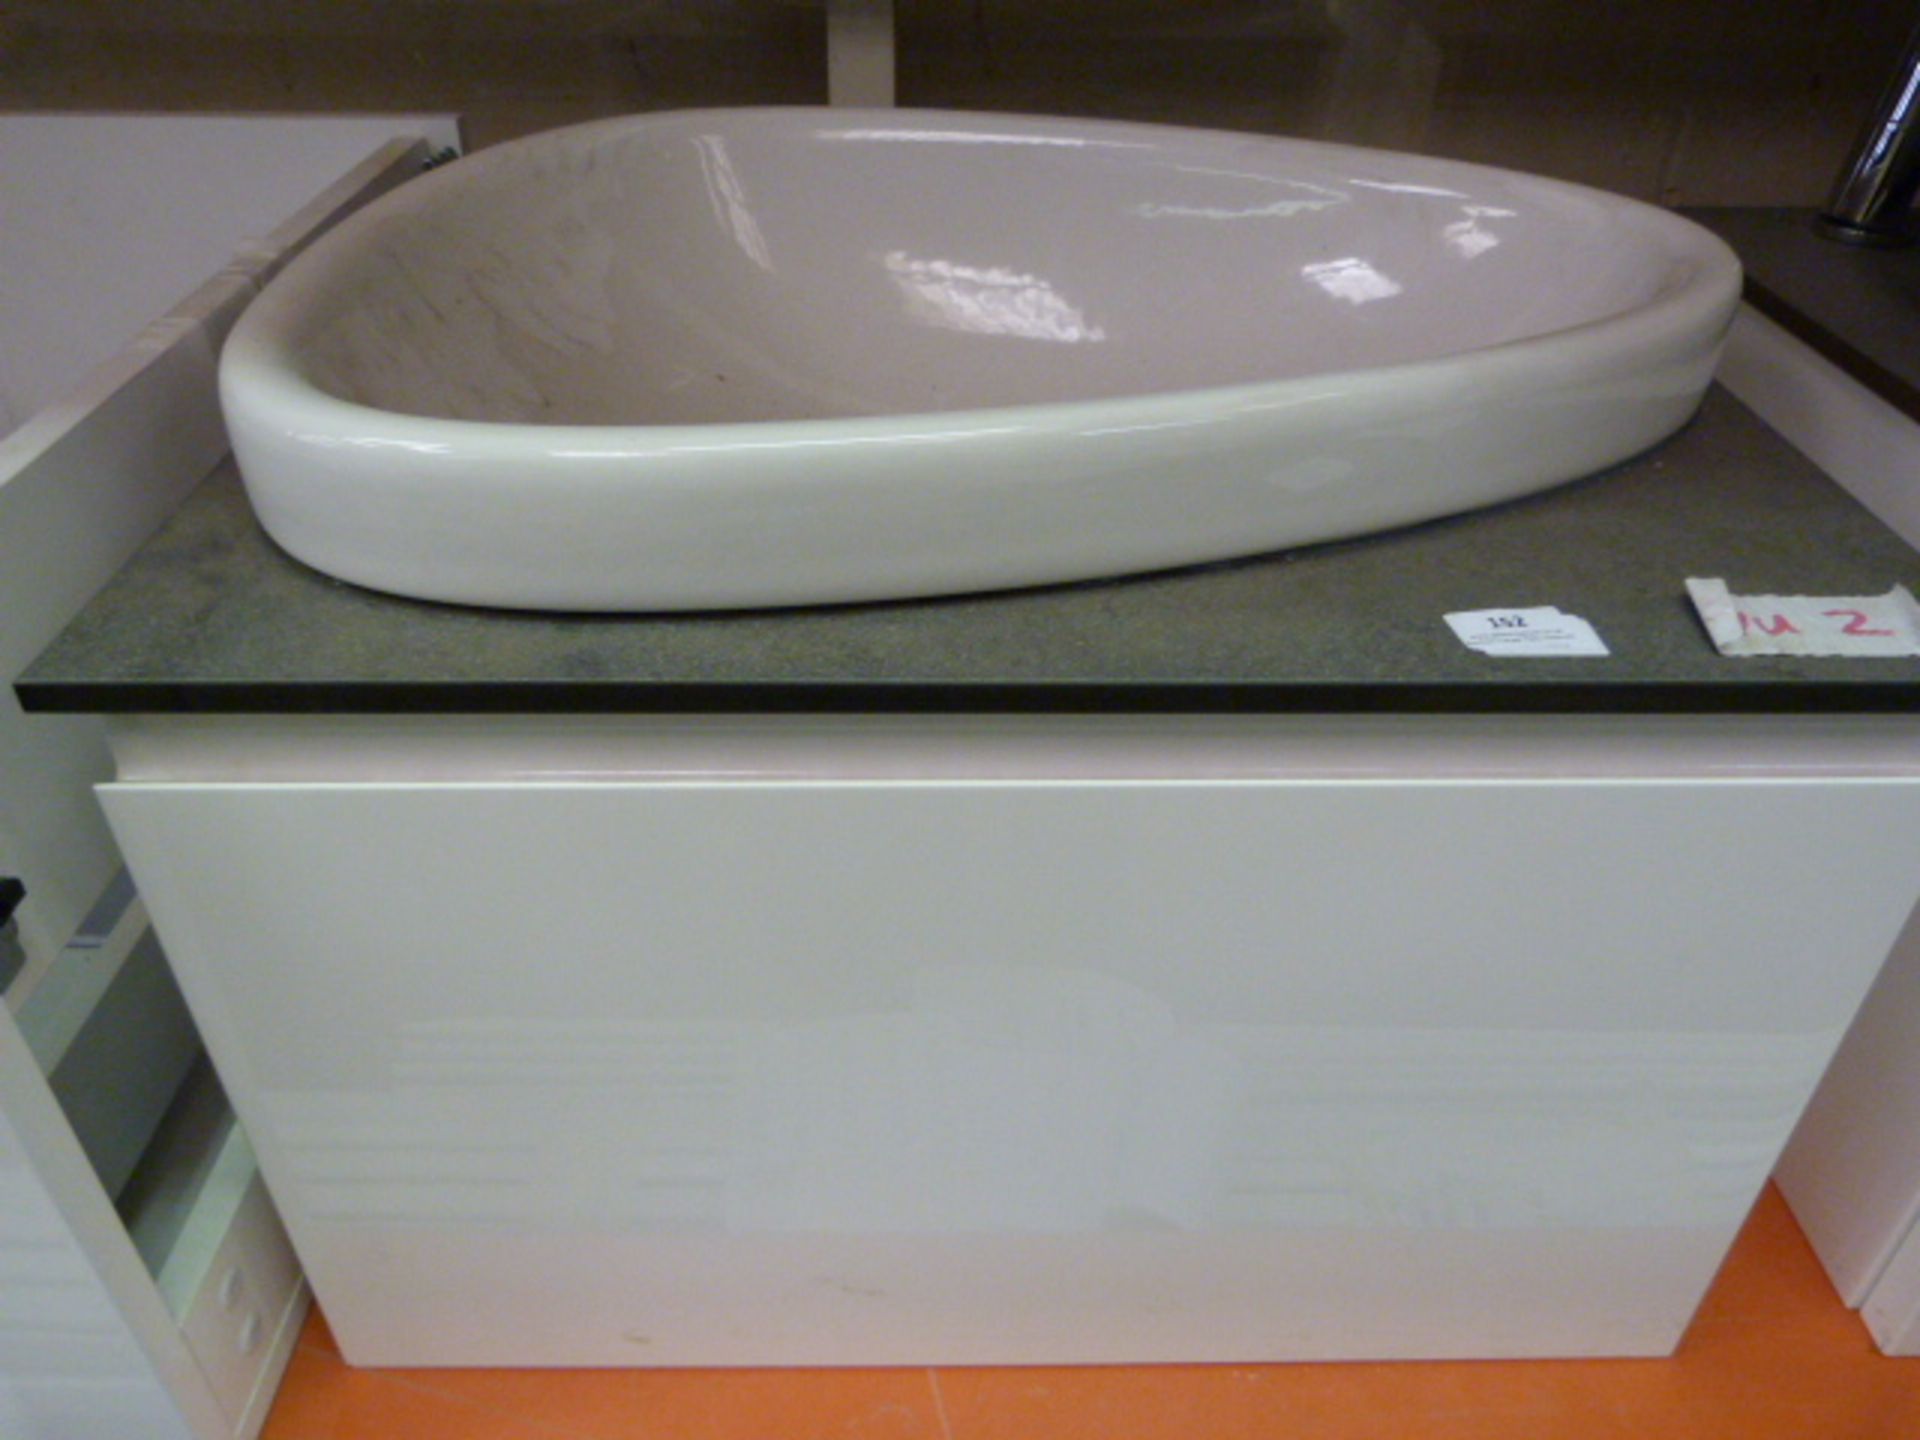 *Contemporary Sink Unit with Drawer